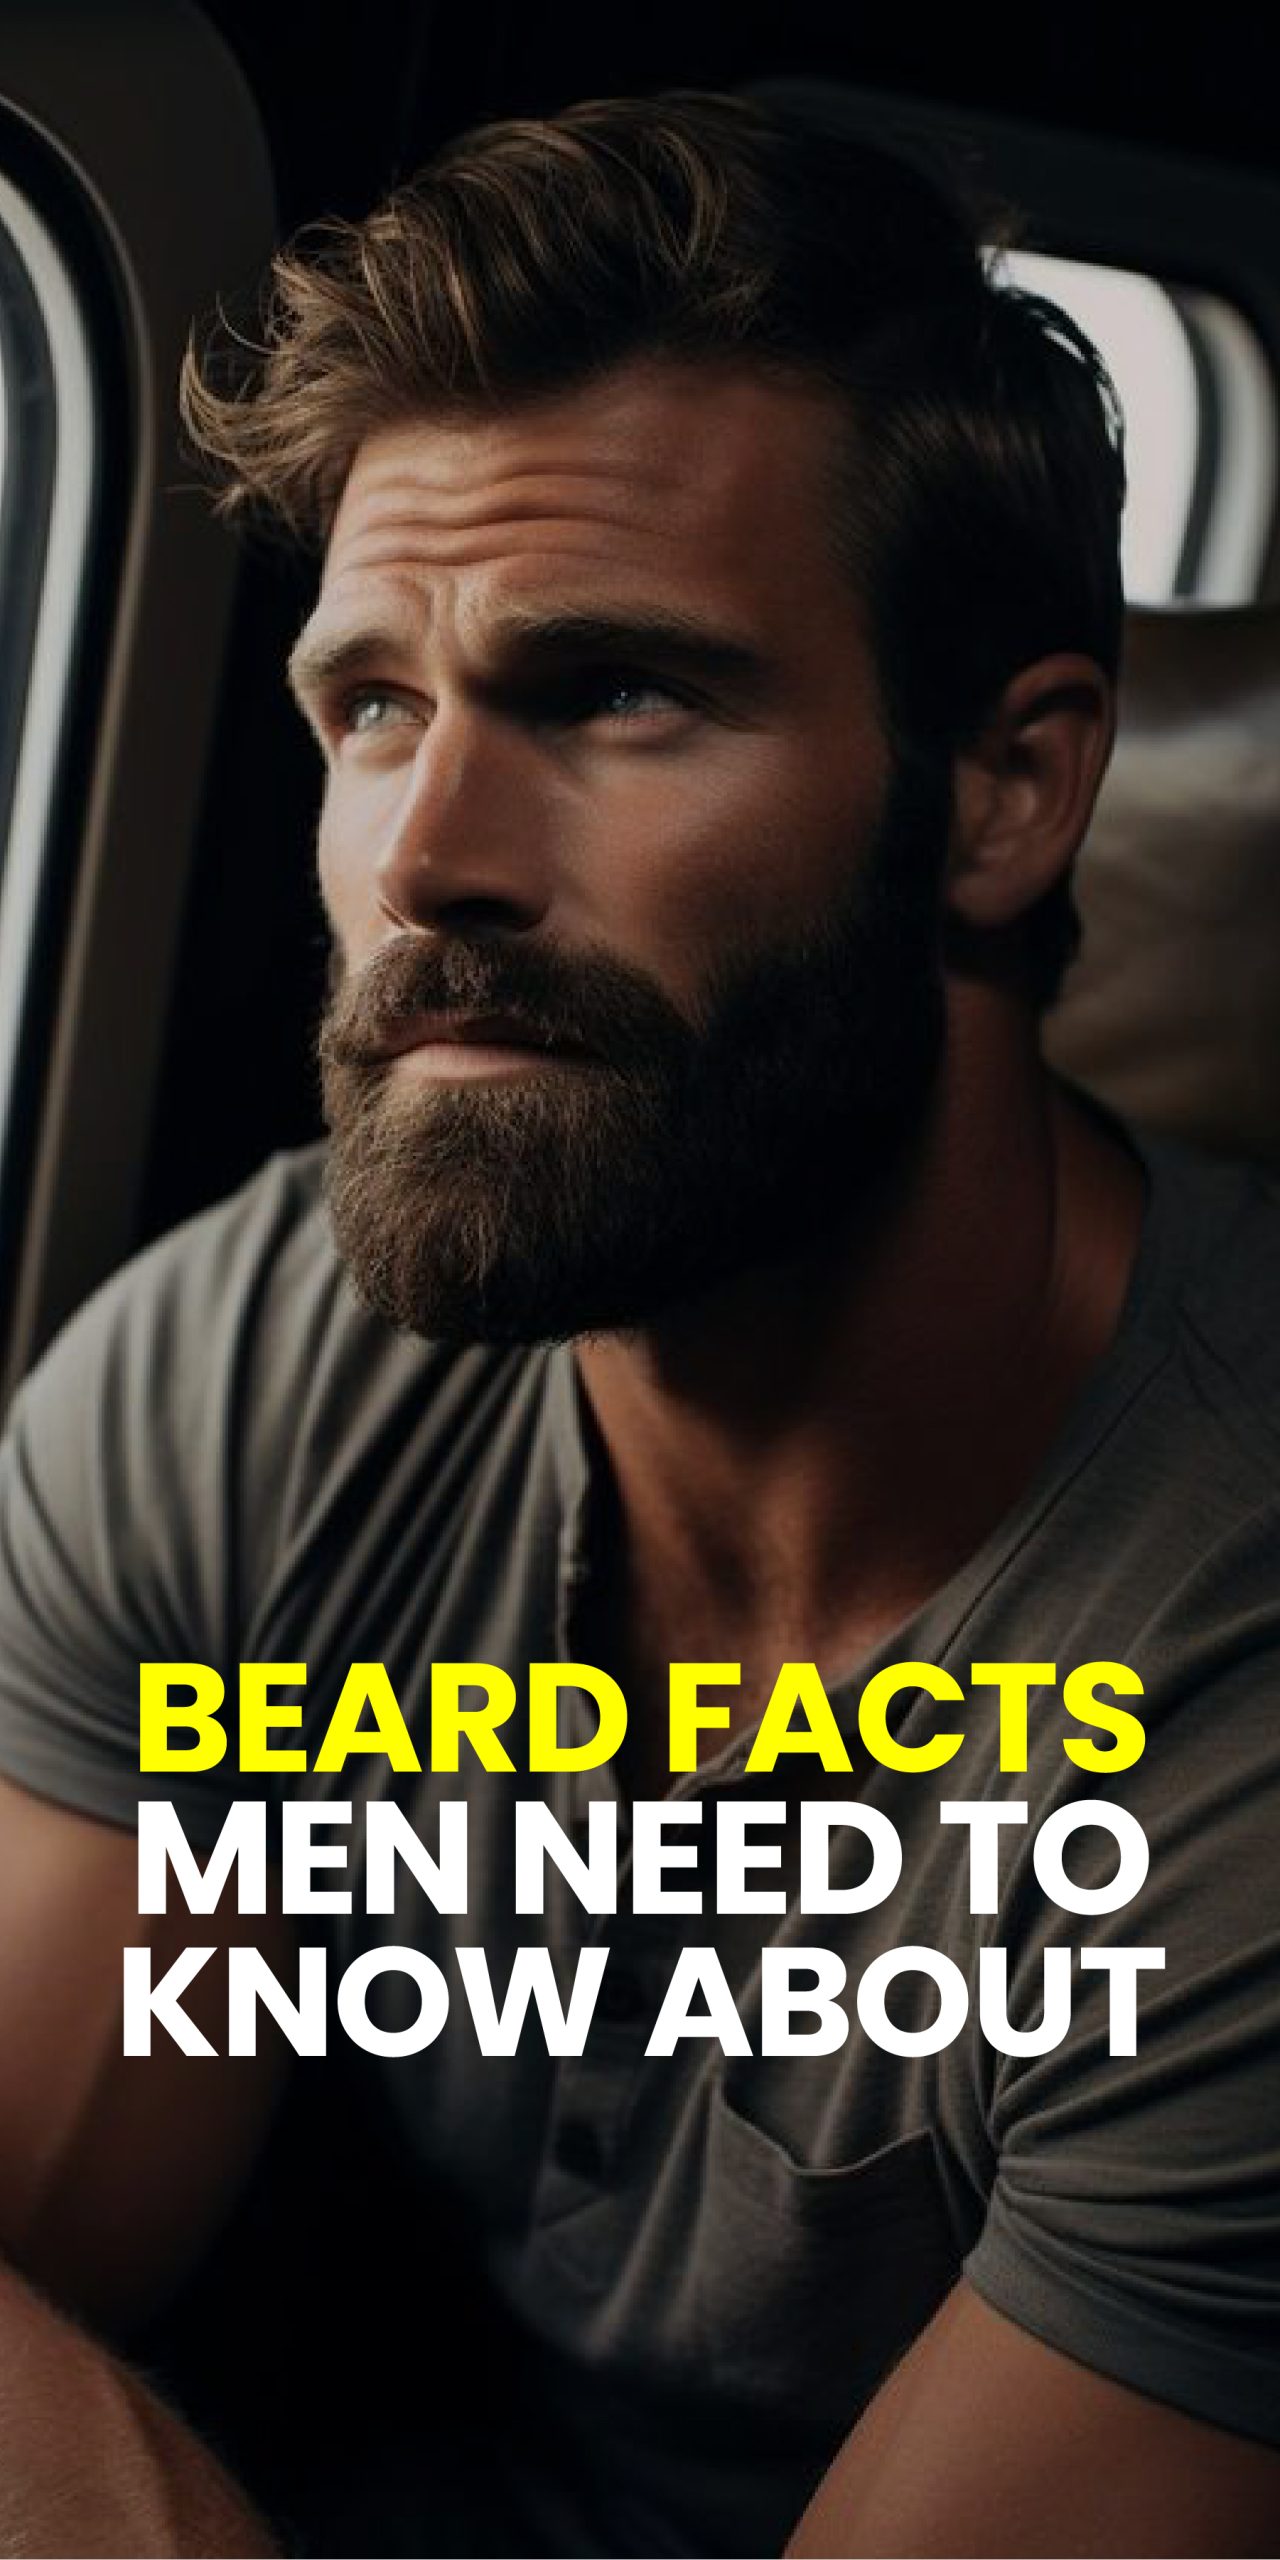 BEARD FACTS MEN NEED TO KNOW ABOUT